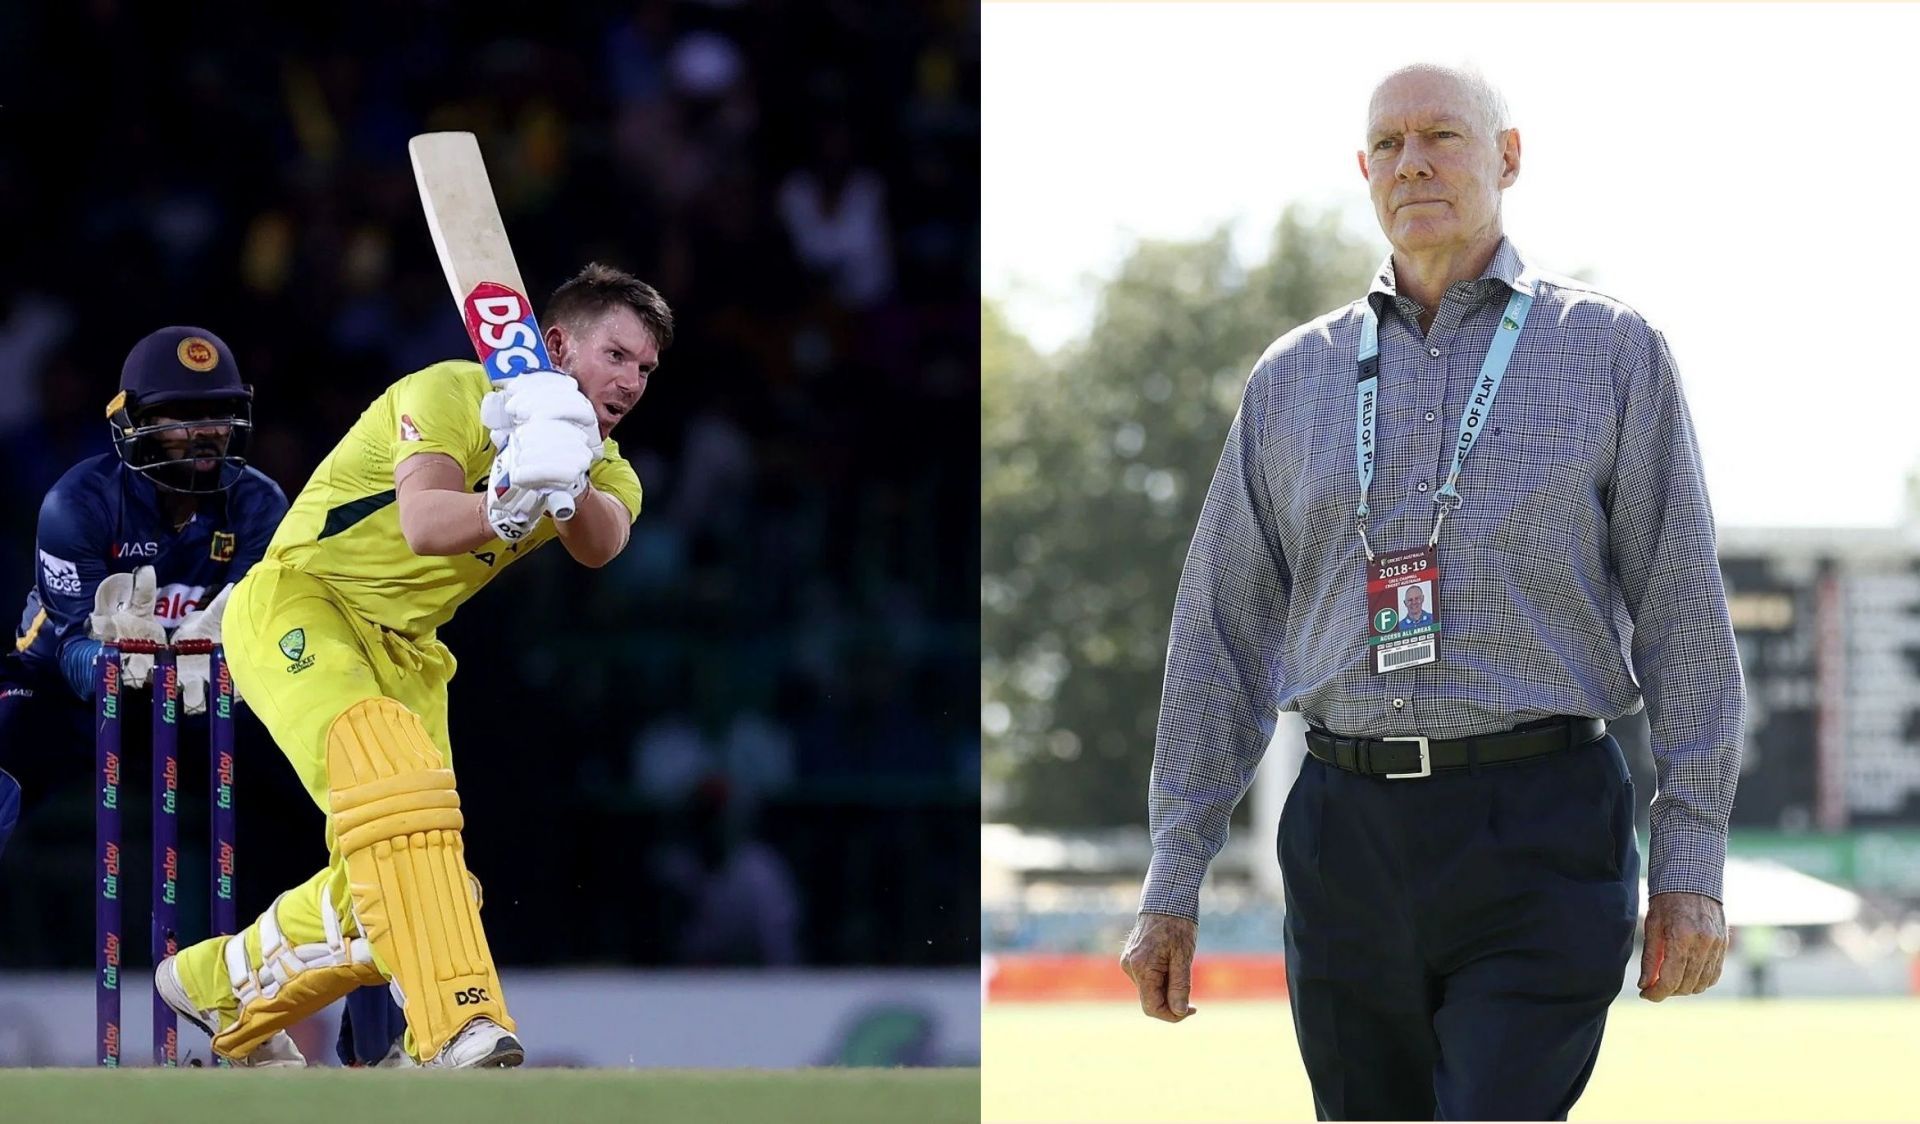 David Warner (left) and Greg Chappell. Pics: Getty Images